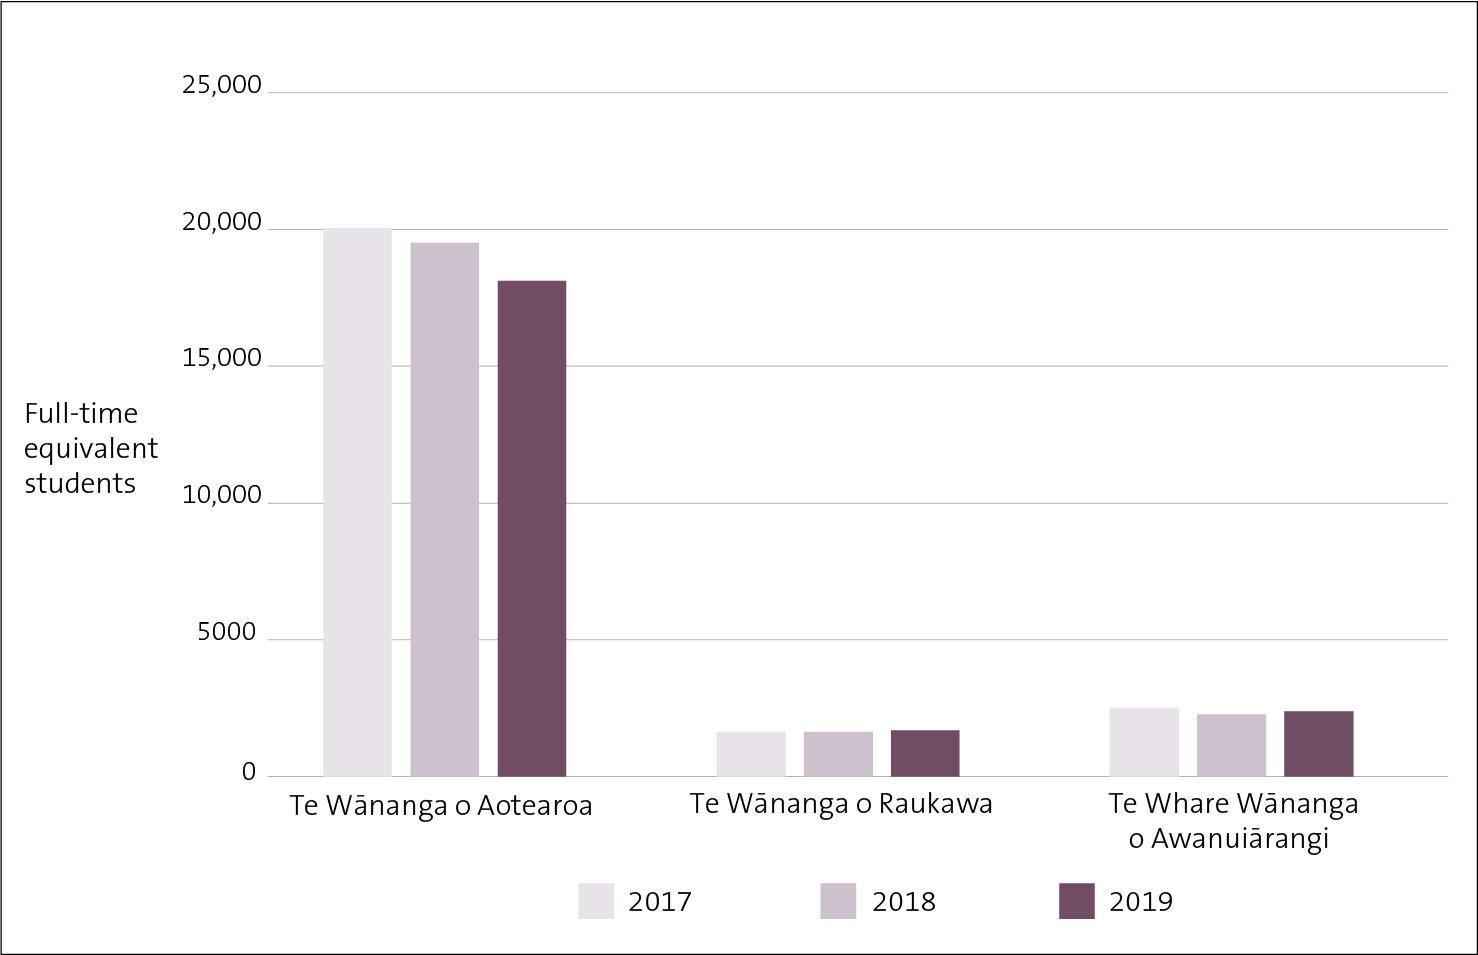 Figure 9 - Total equivalent full-time student enrolments at wānanga, from 2017 to 2019